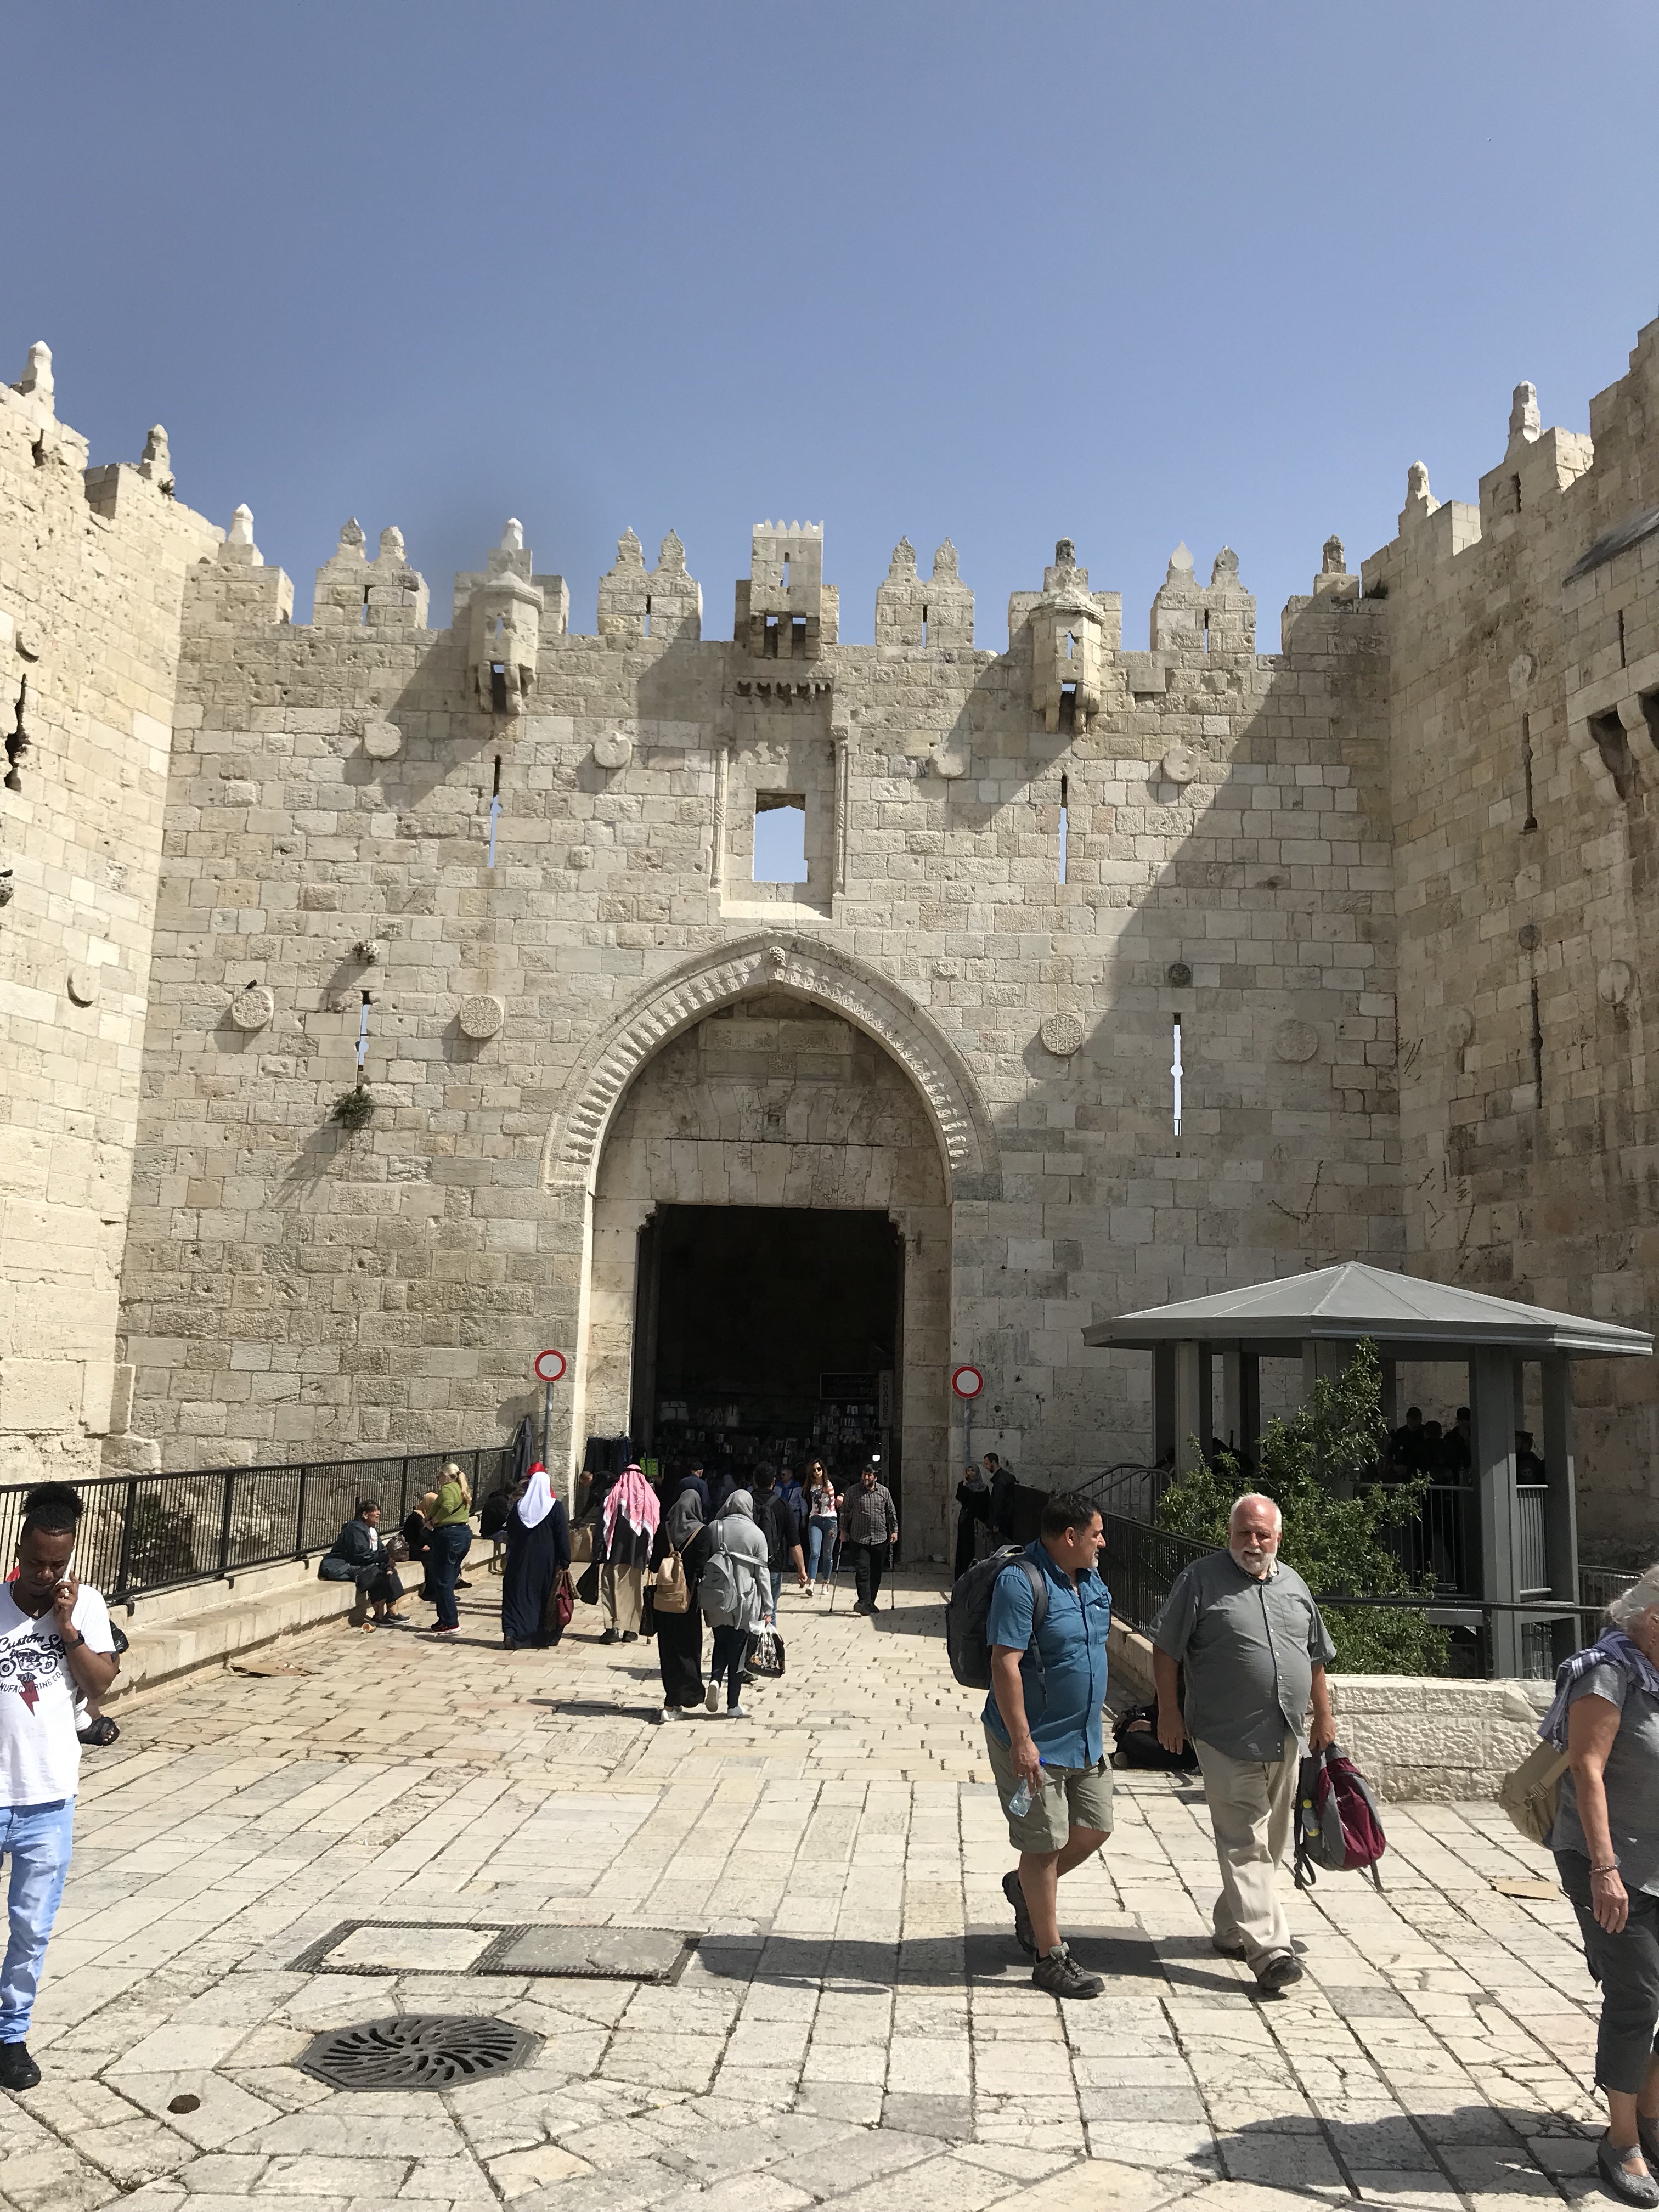 Coming out of the Damascus Gate